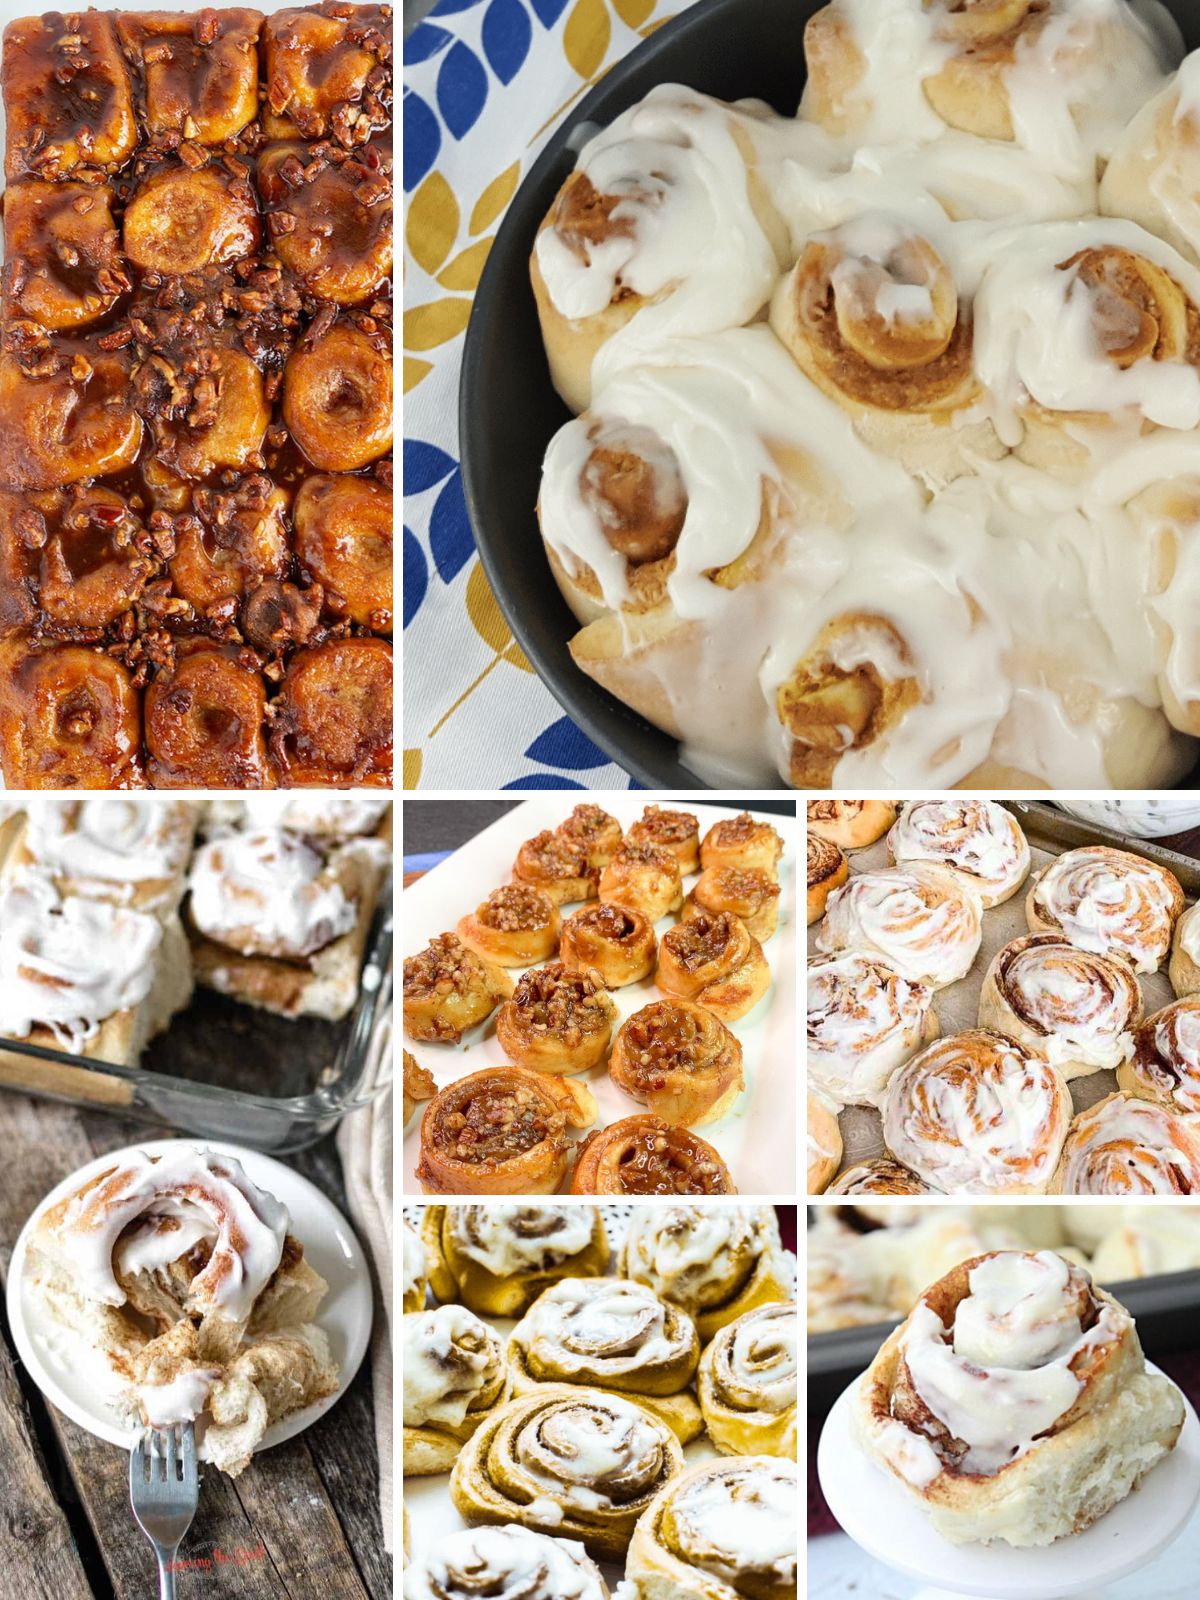 A collection of cinnamon rolls all made using frozen bread dough.